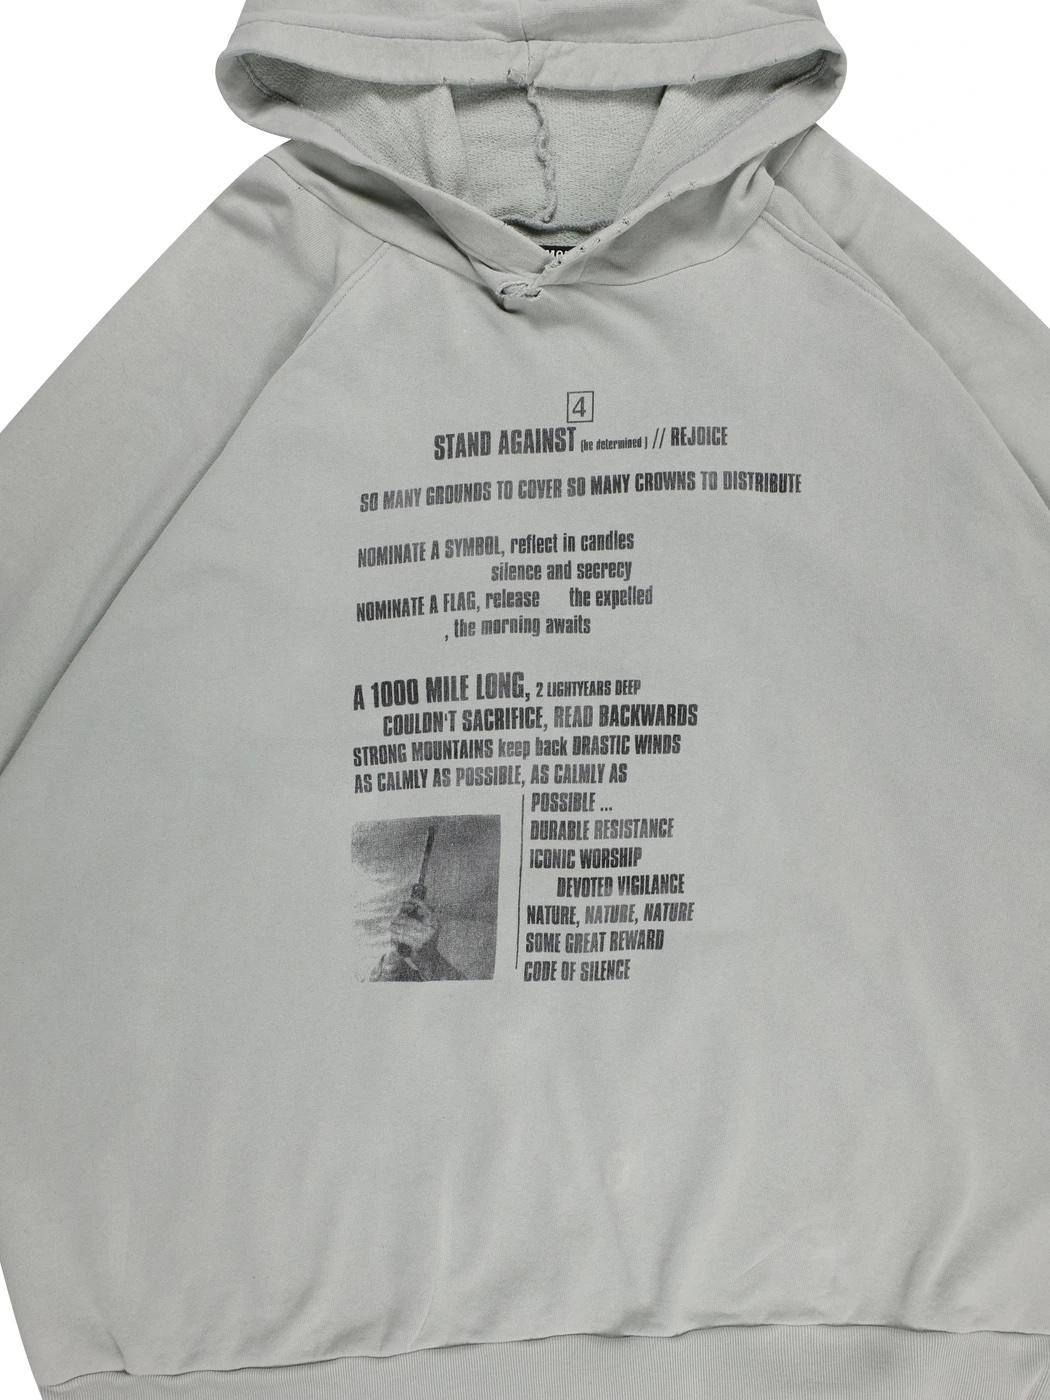 An extremely rare and legendary Terrorism hoodie from Raf Simons' SS02. This piece features ominous writing and haunting imagery on the front and back that was shown on the infamous show where Raf's models walked down the runway with masks and